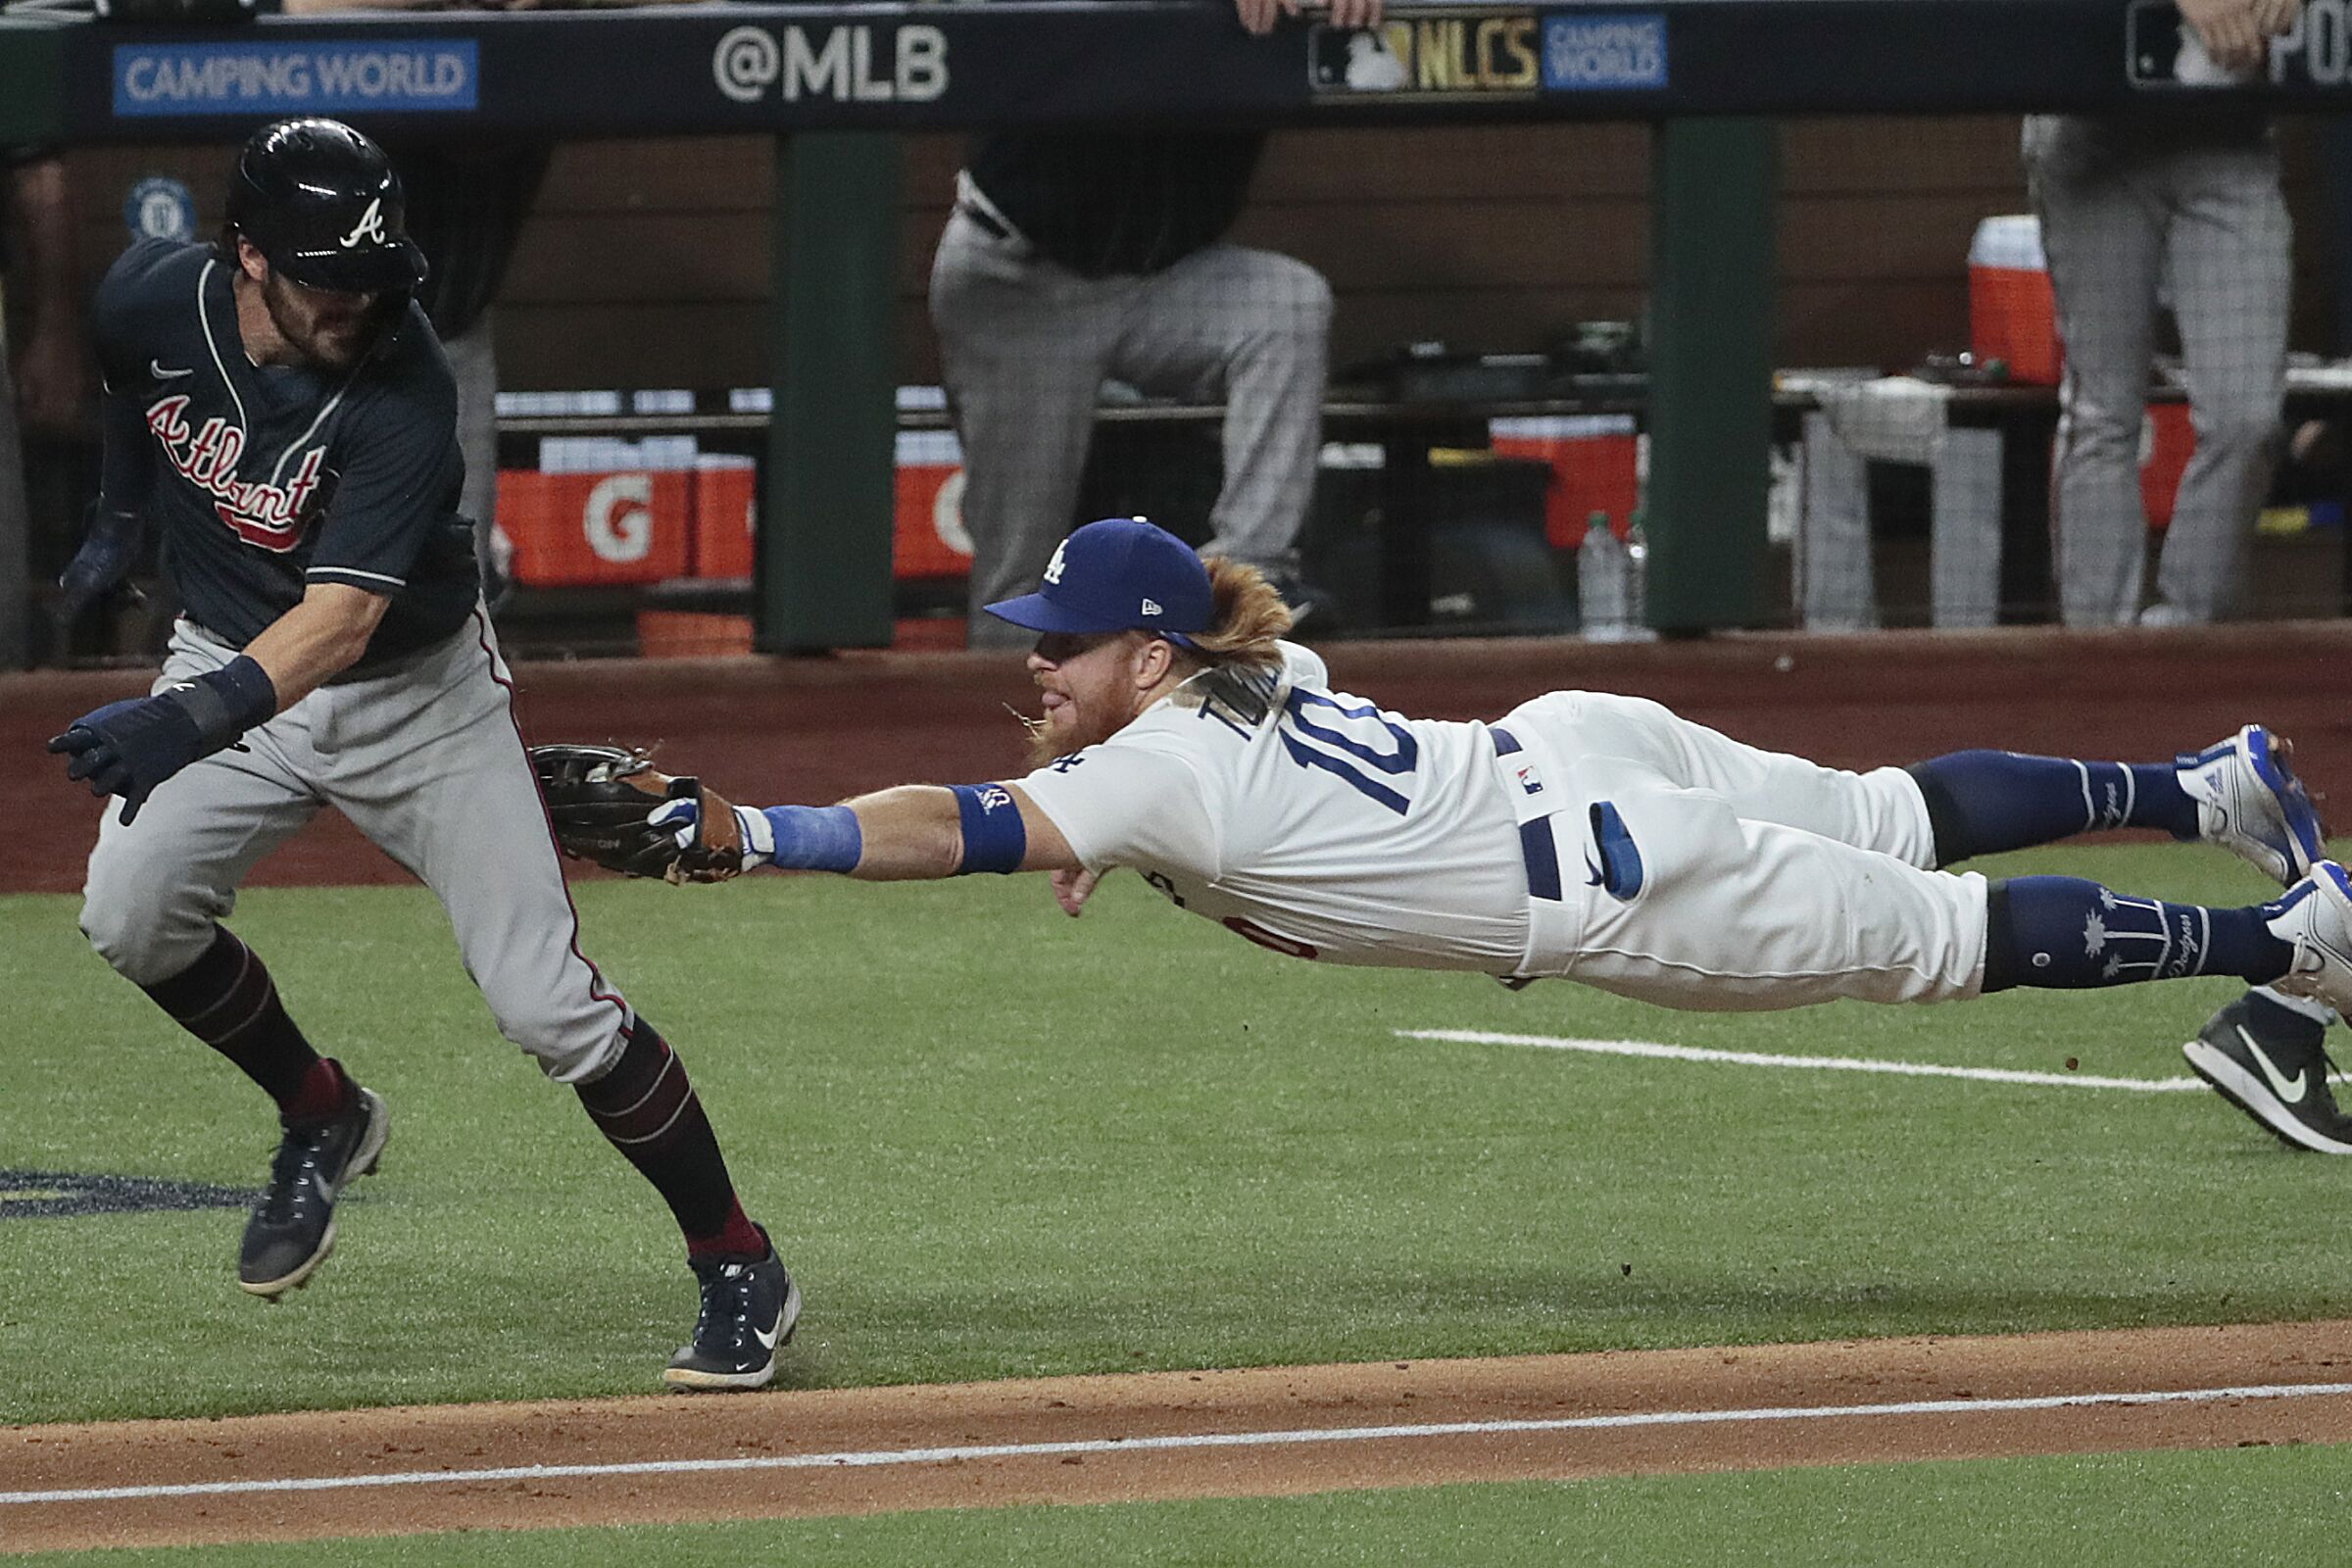 Dodgers third baseman Justin Turner tags out Braves shortstop Dansby Swanson in Game 7 of the 2020 NLDS.